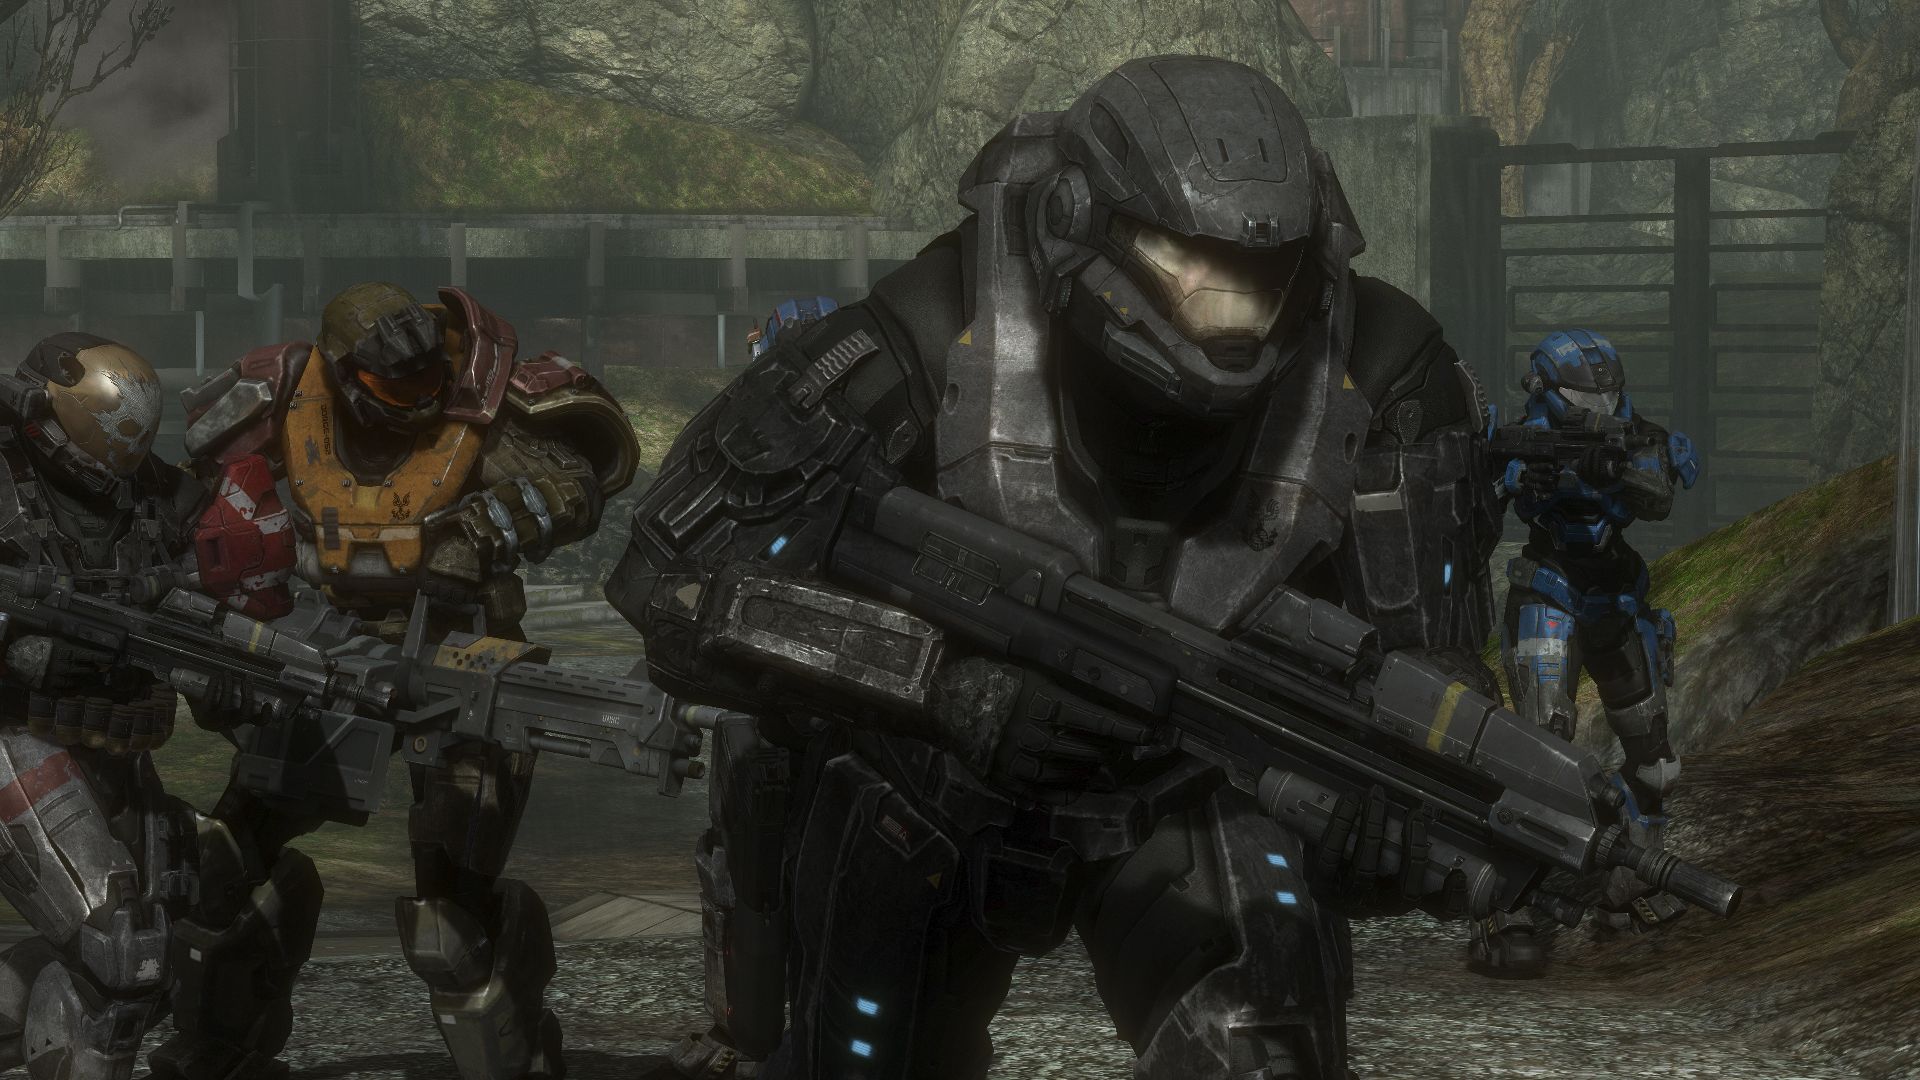 Halo Reach matchmaking uppdatering